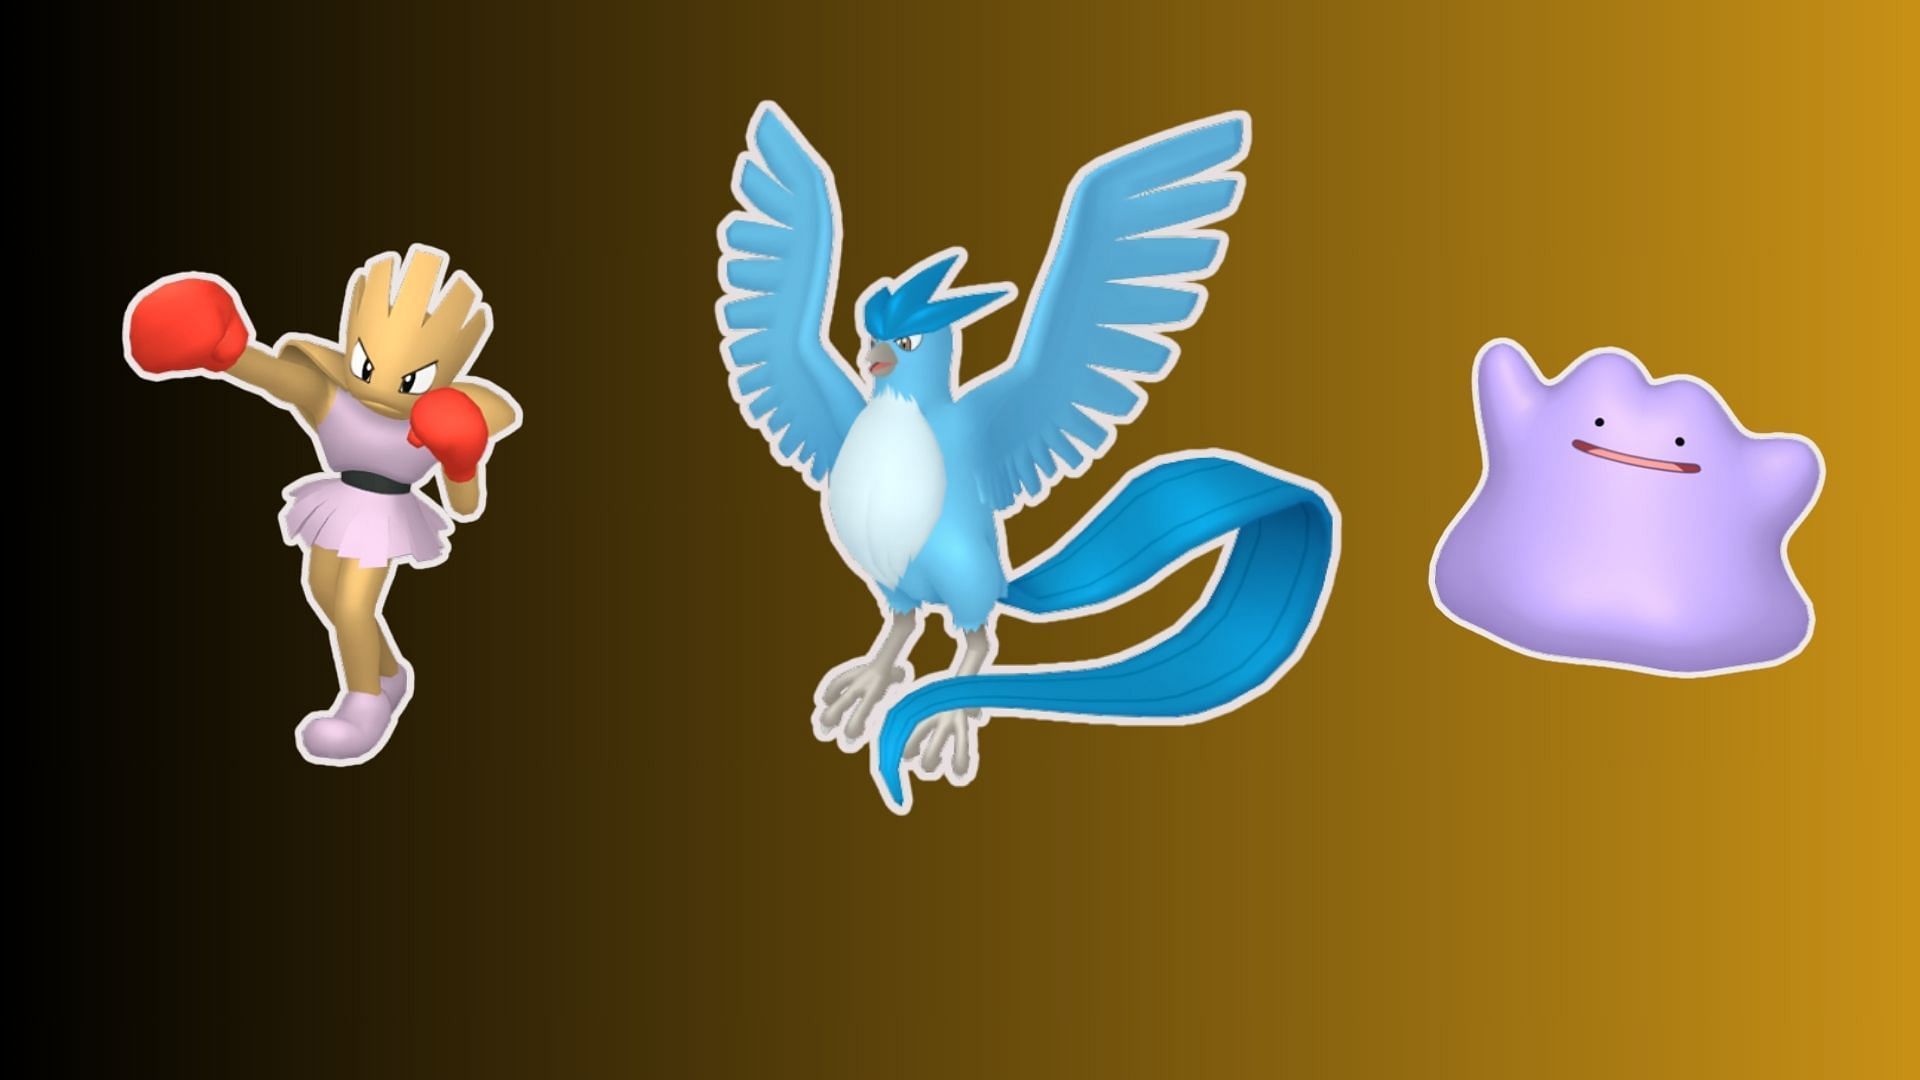 10 Kanto Pokemon that are hard to catch in Pokemon games